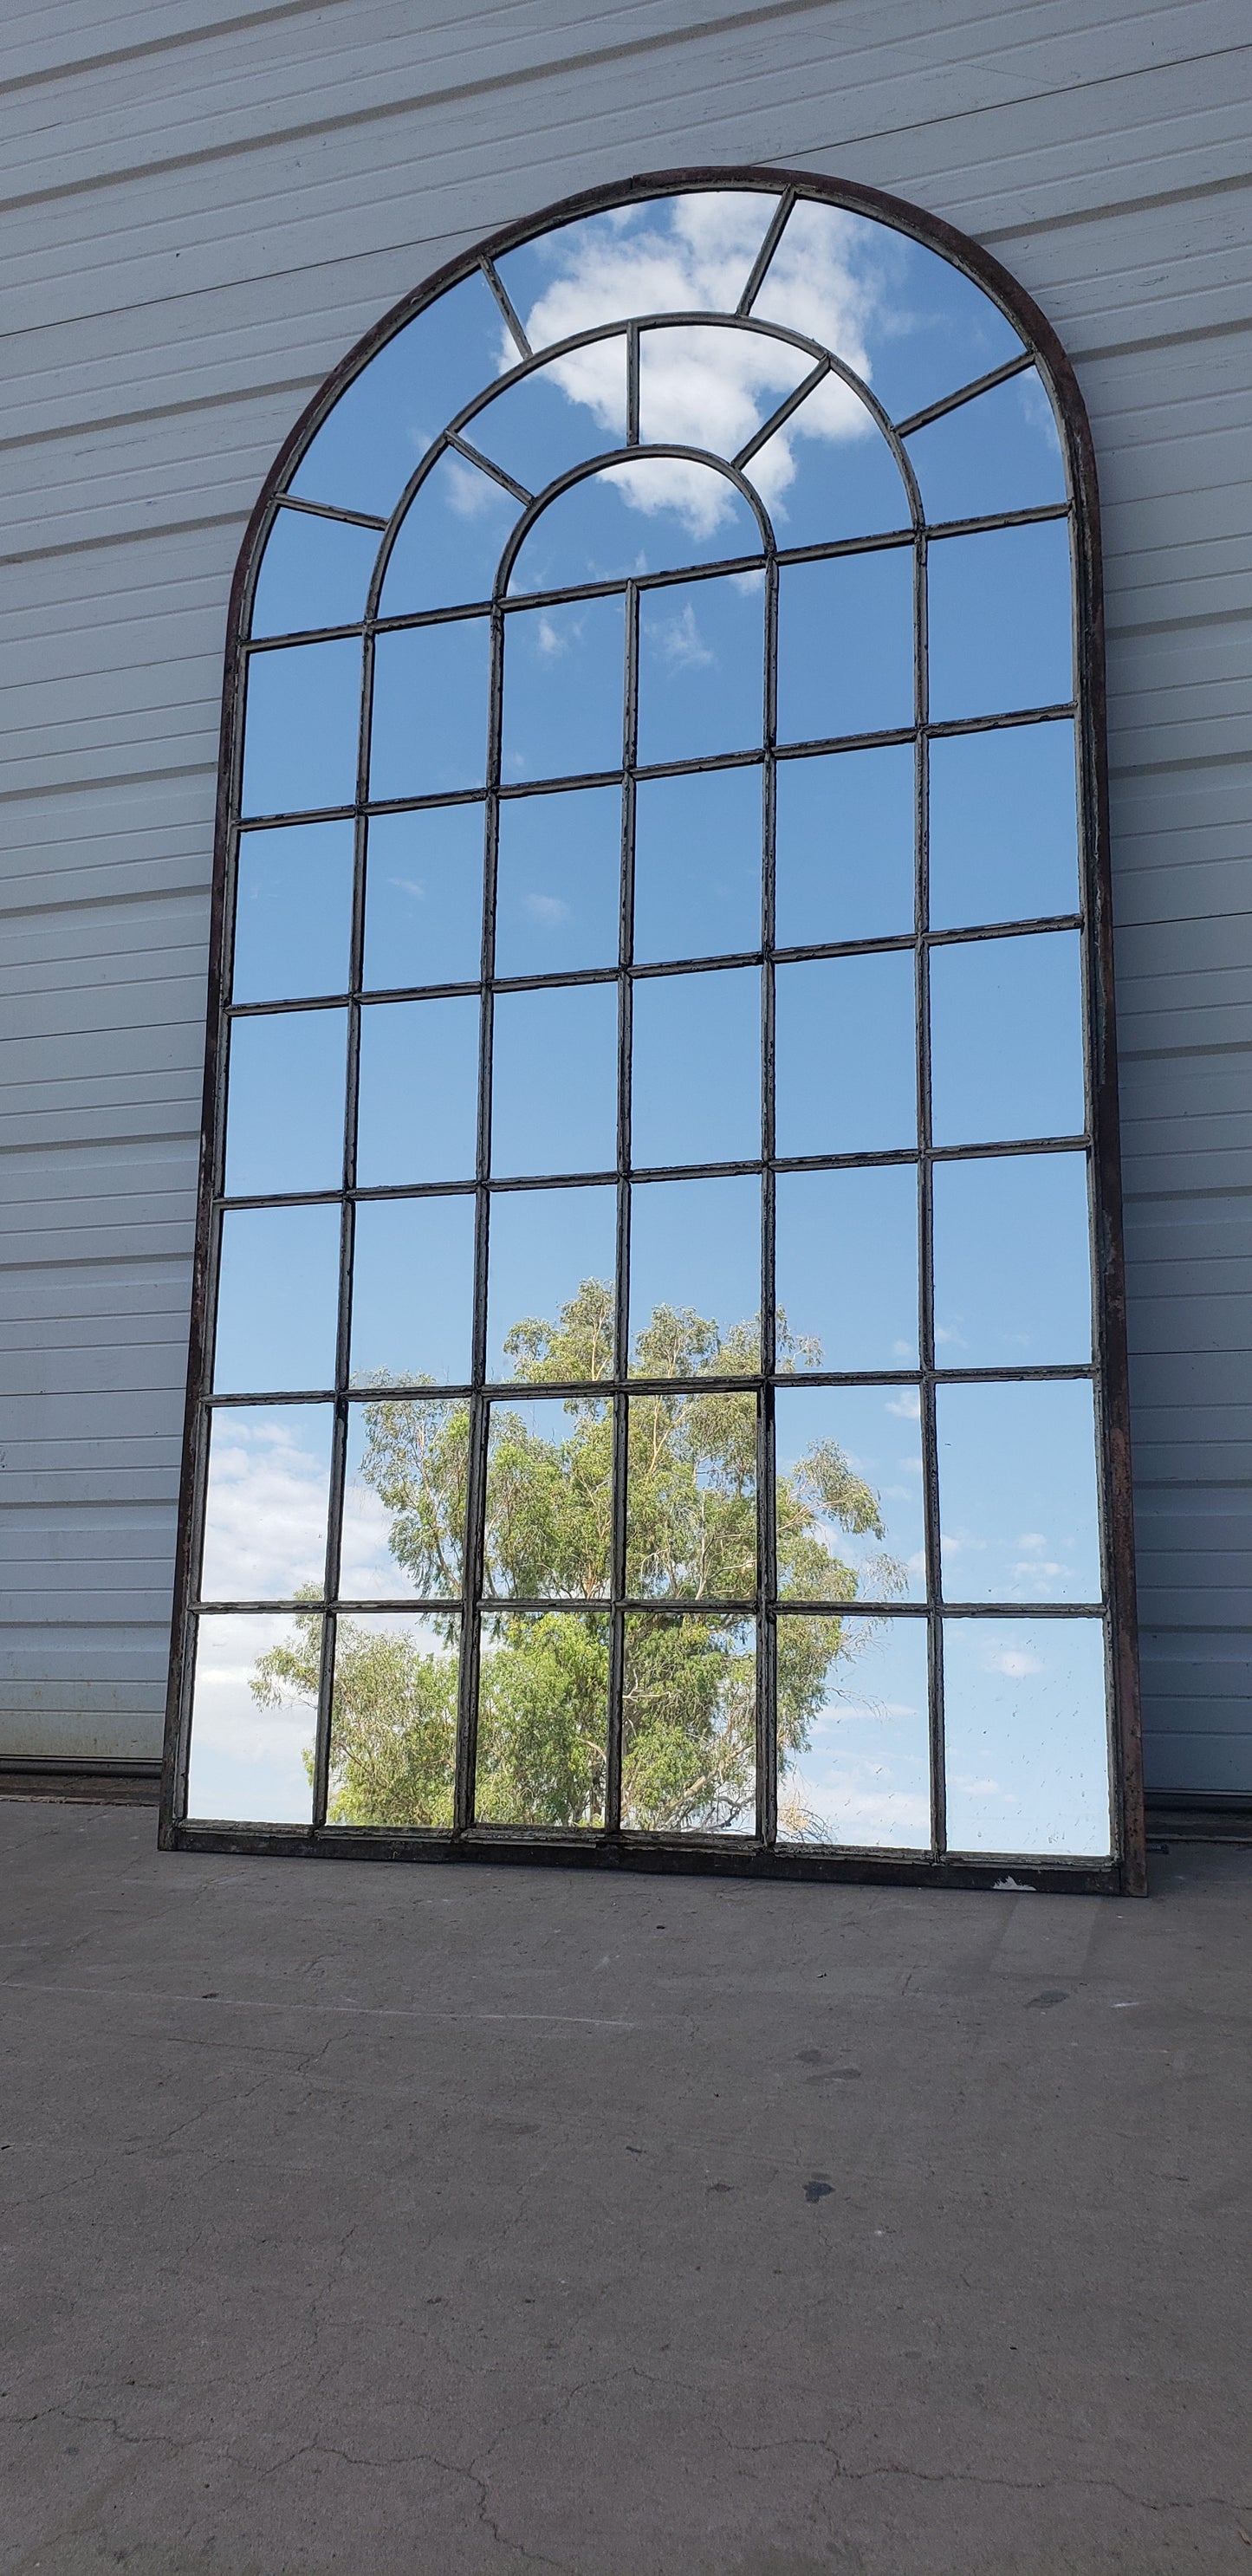 46 Pane Repurposed Arched Iron Factory Mirror